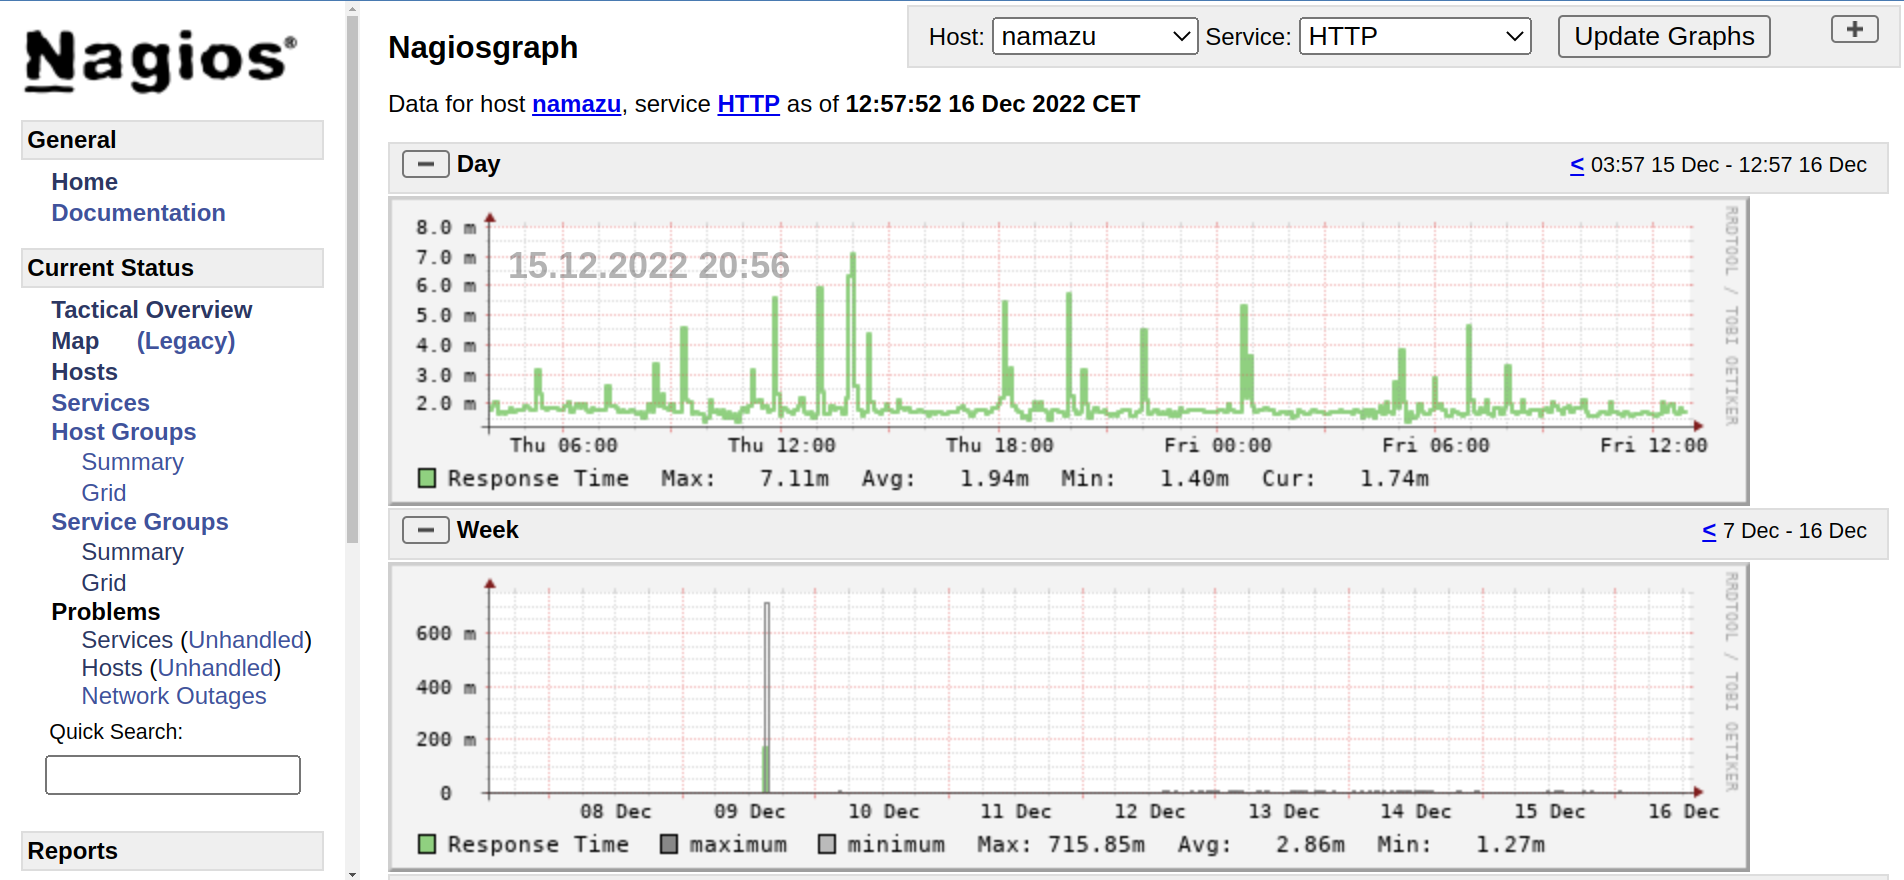 Nagios interface showing specific service performance